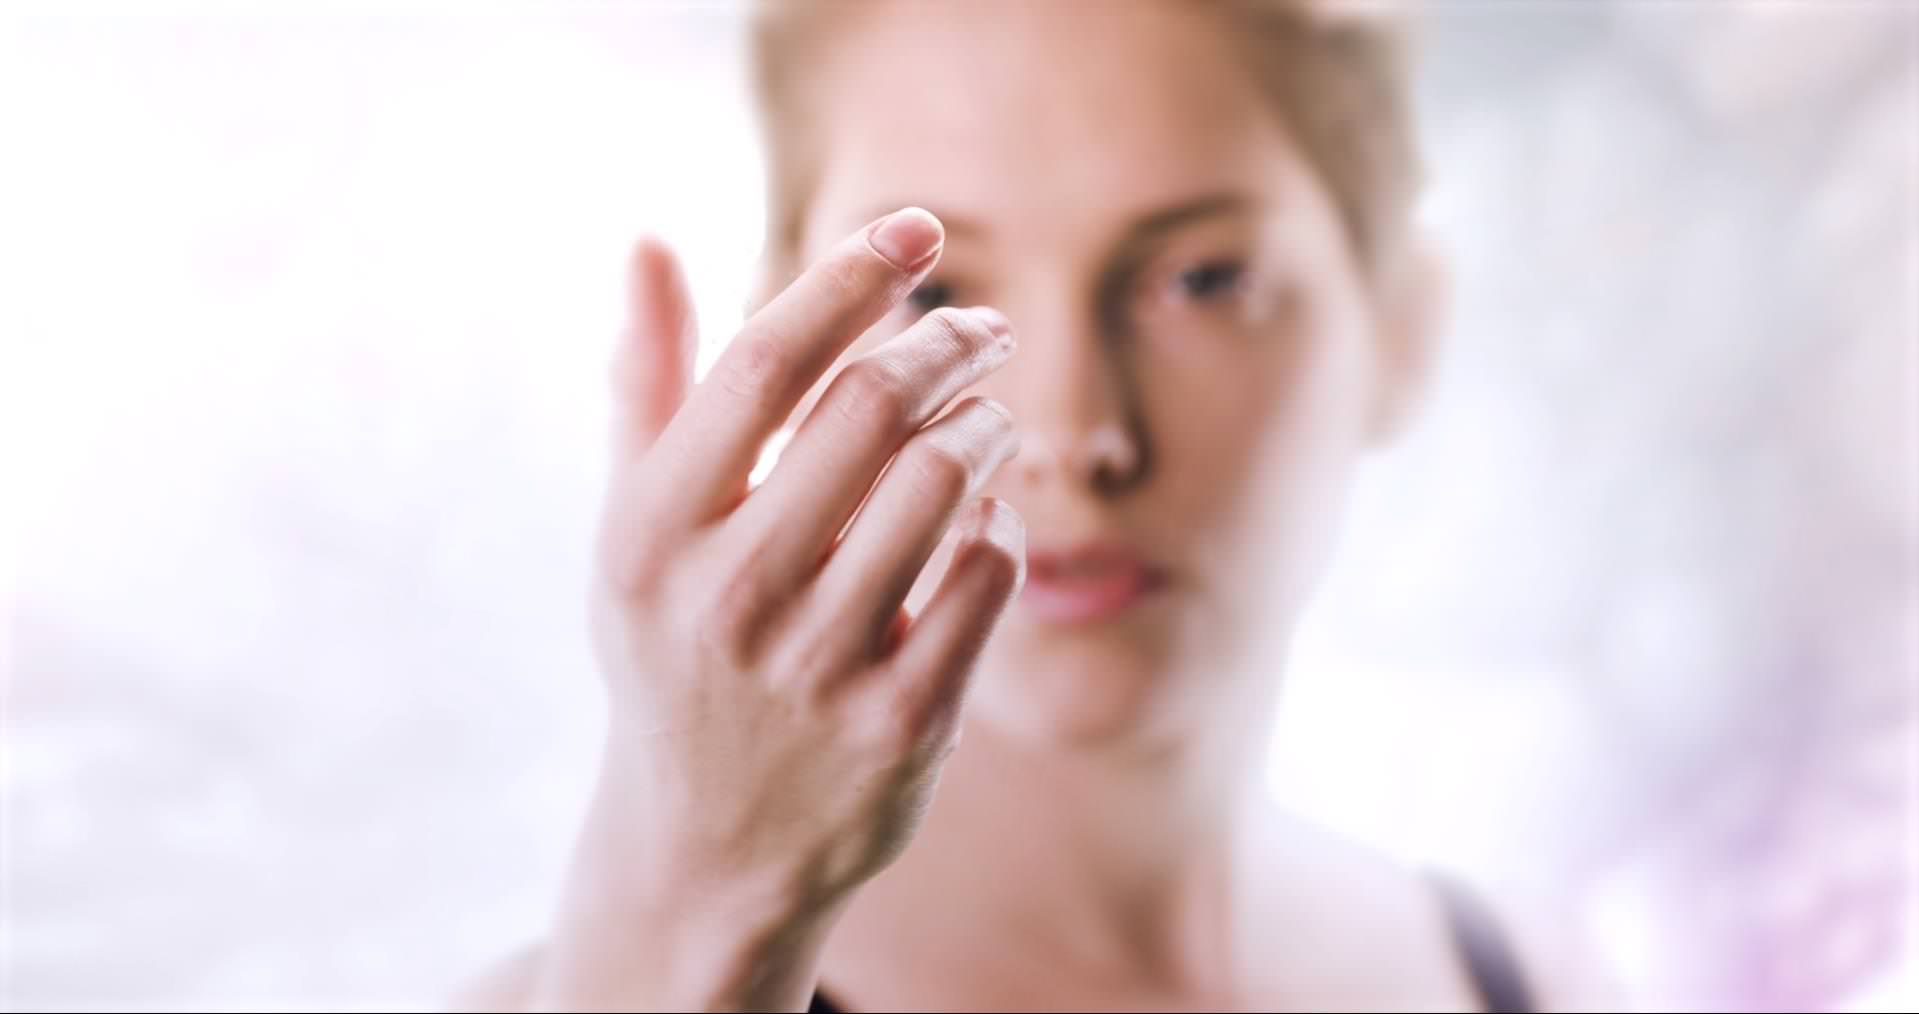 This image shows a female model looking at her own hand